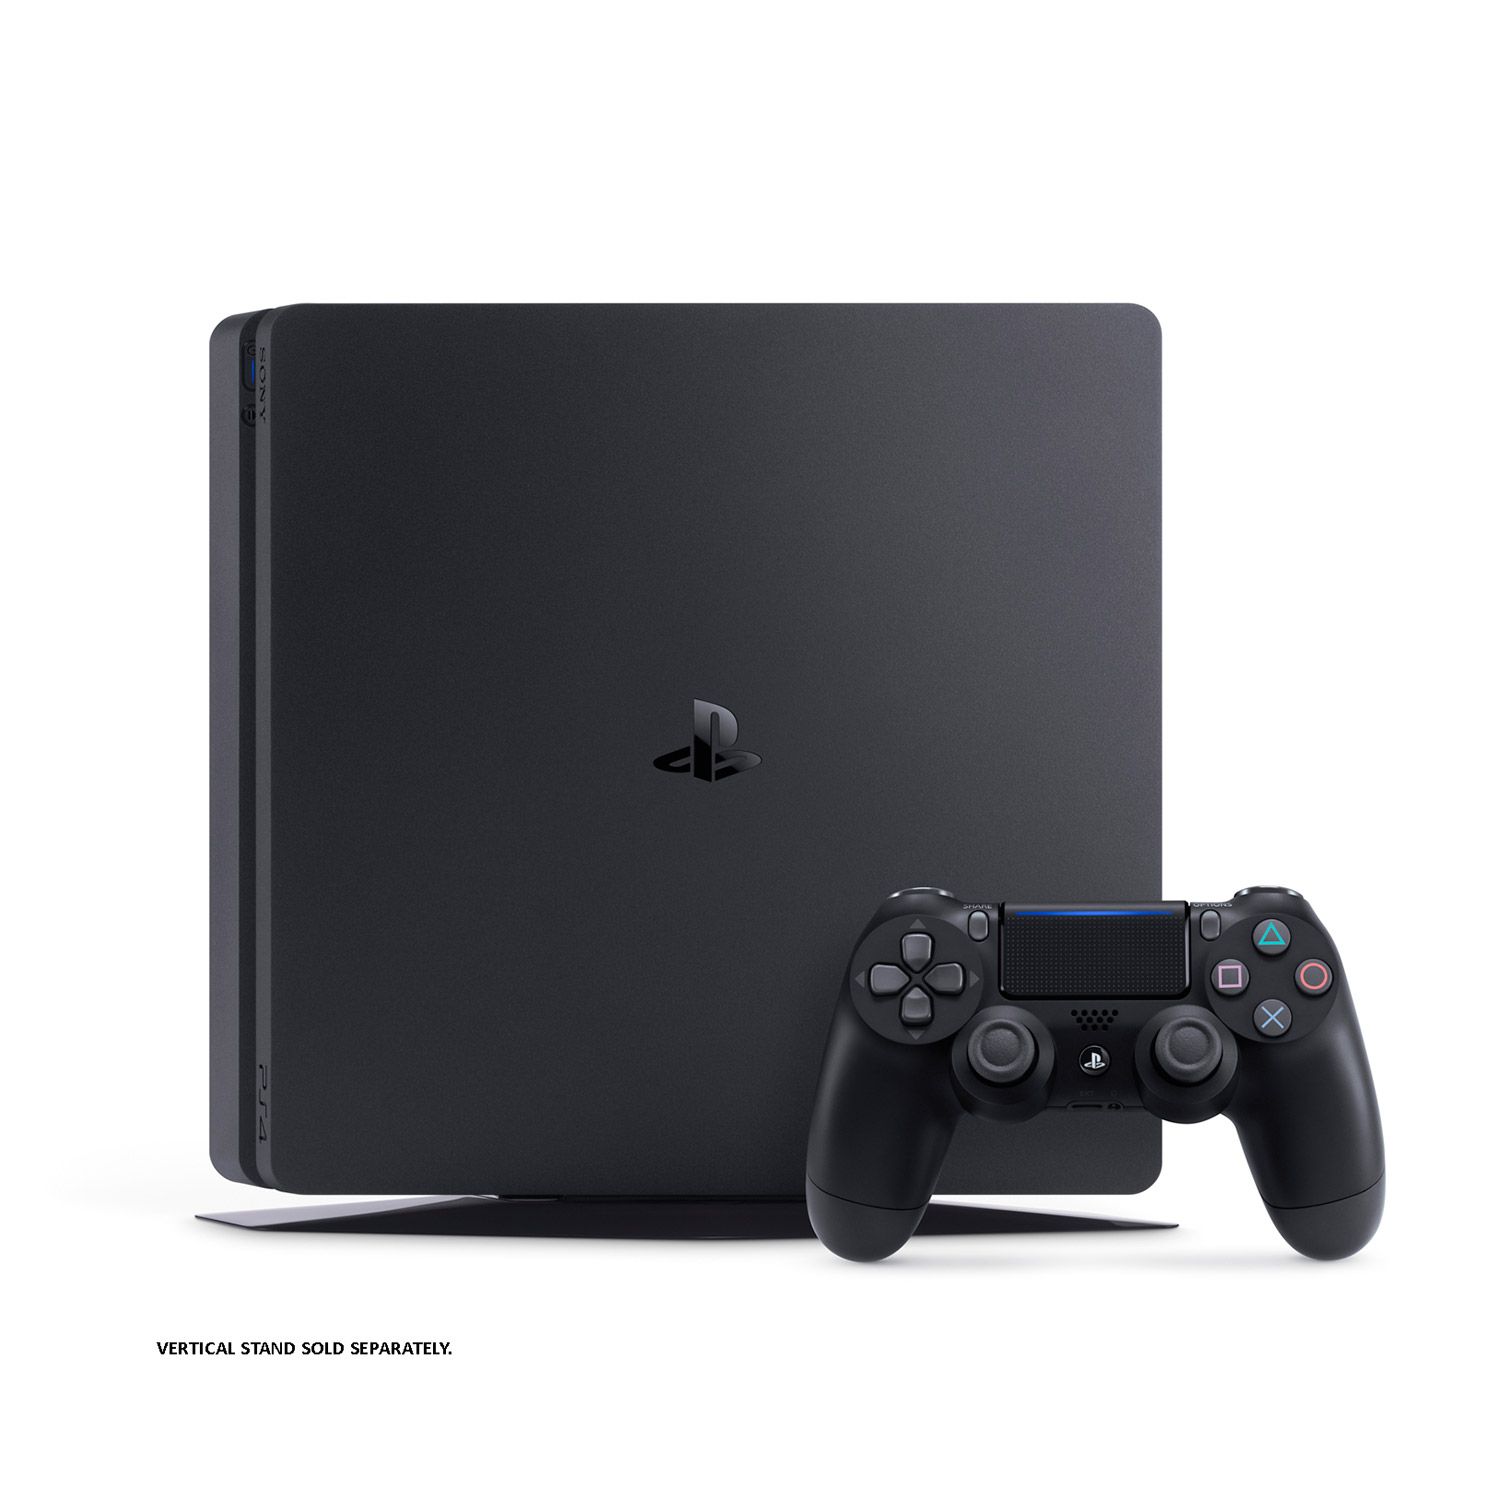 petulance Syndicate Spil PlayStation 4 Slim 500GB Console | The Gamesmen